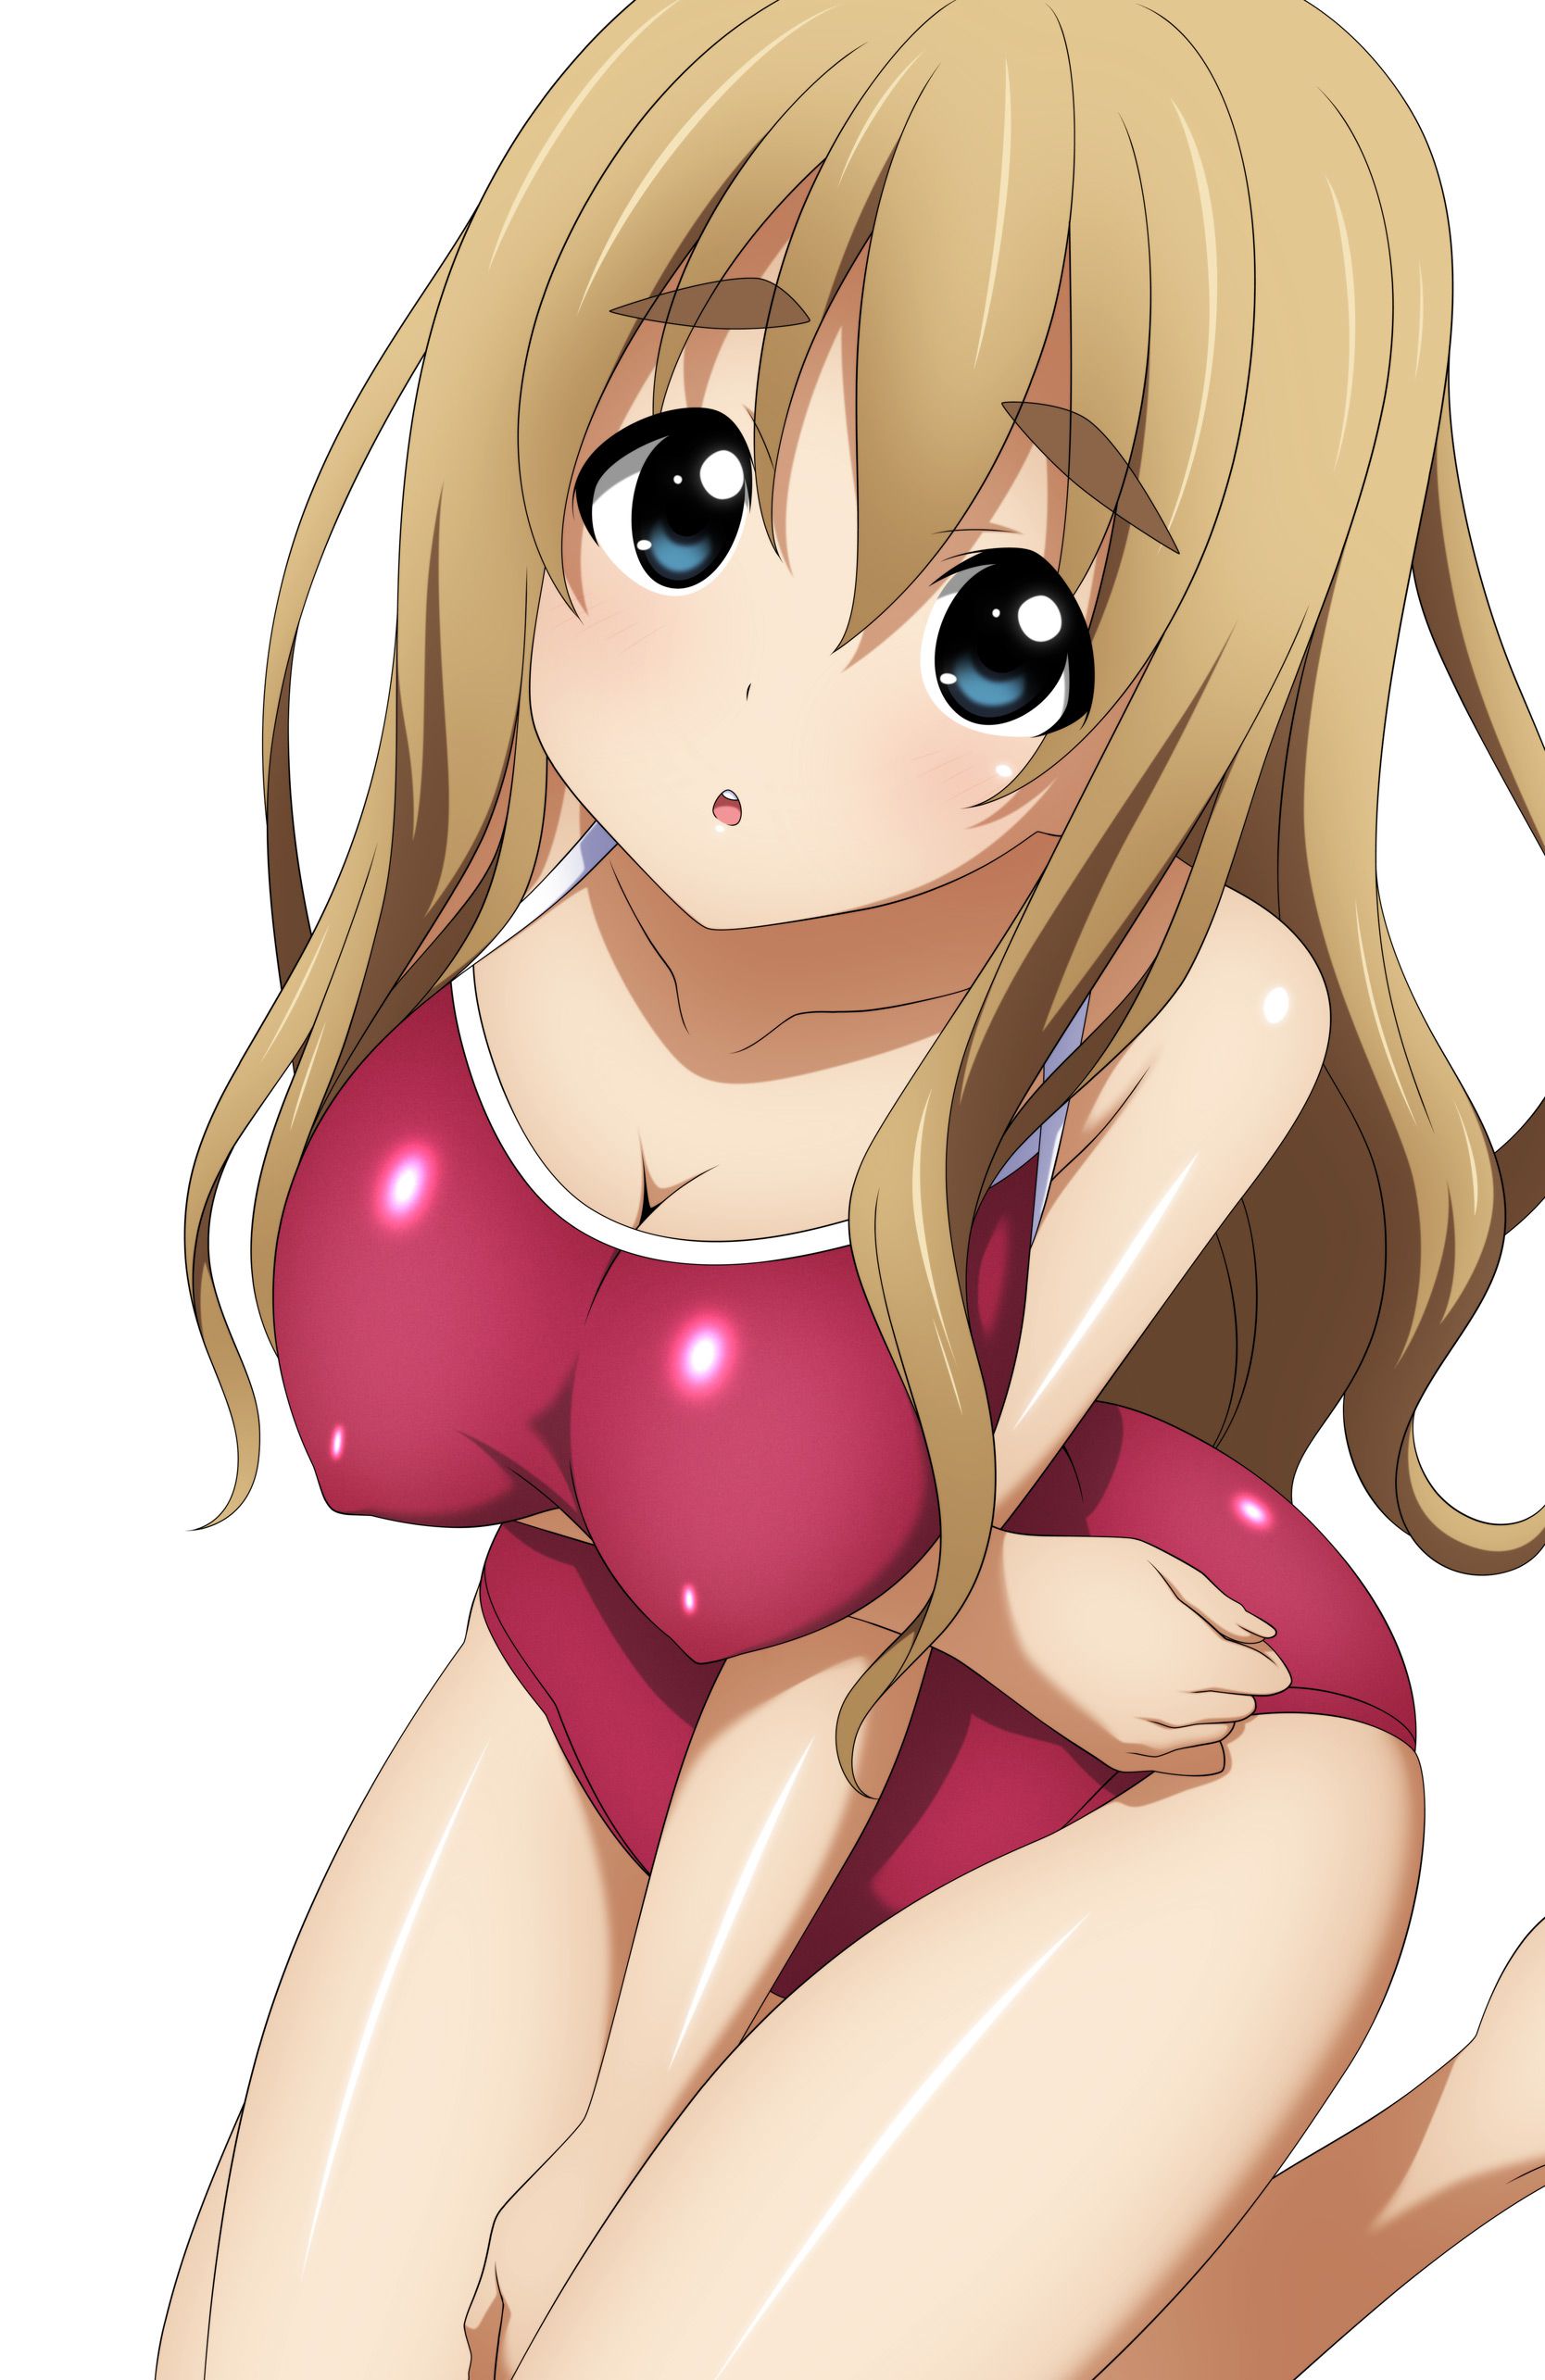 K-on! So erotic and good? 10